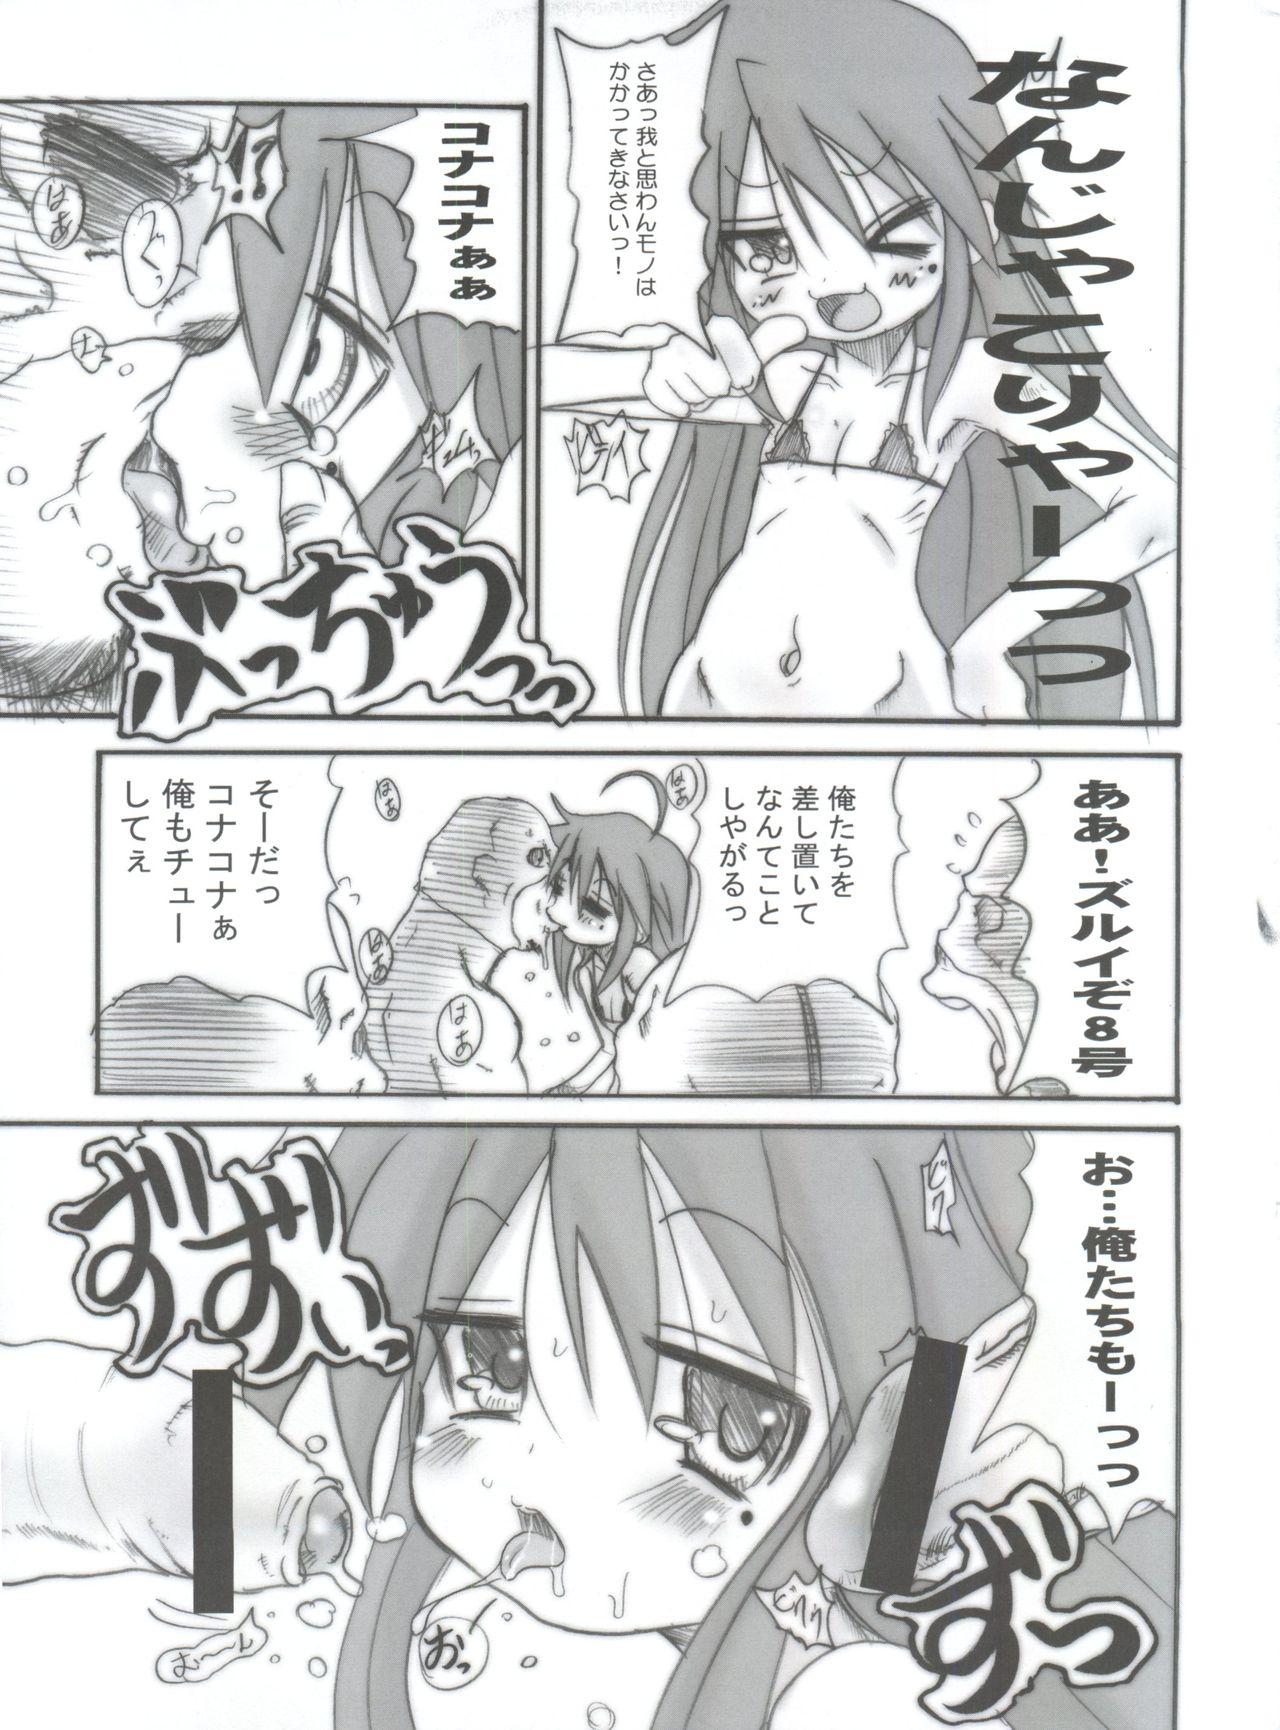 Puto Lucky Punch - Lucky star Step - Page 6